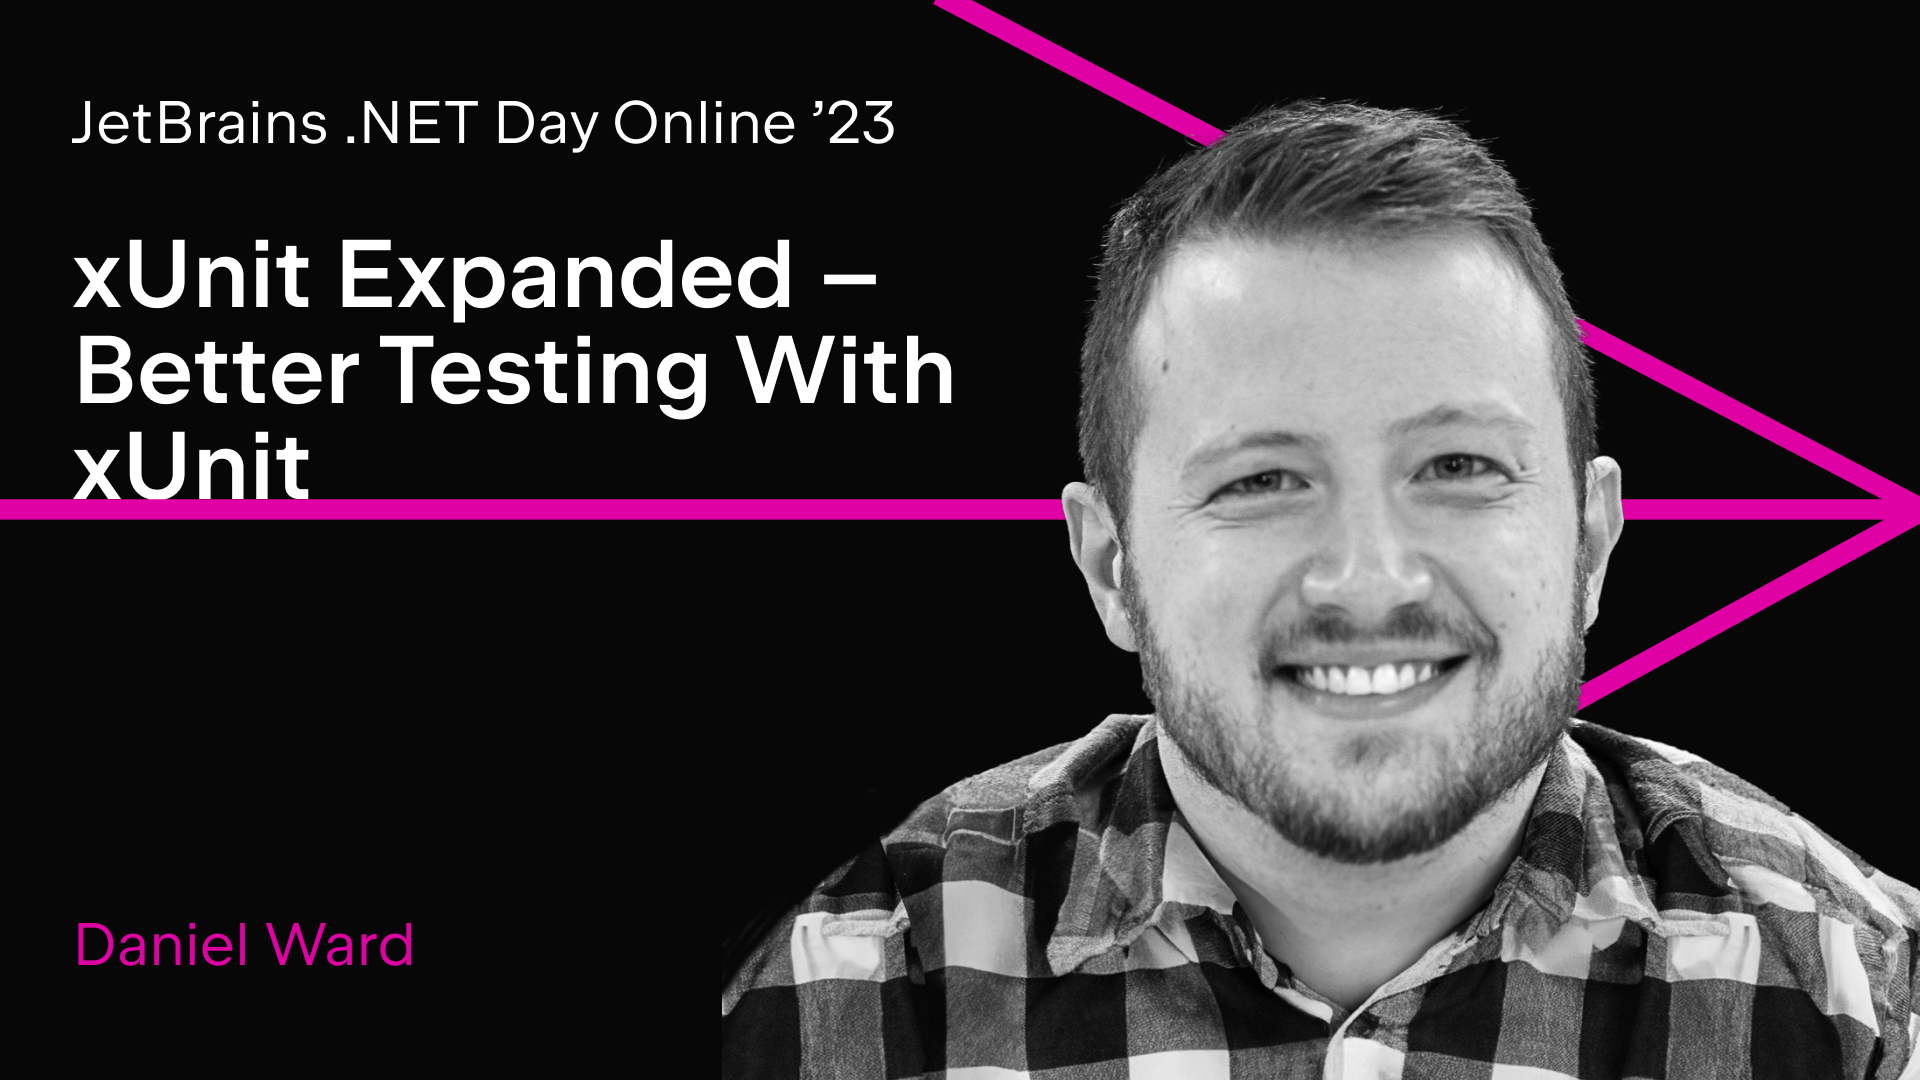 xUnit Expanded - Better Testing With xUnit